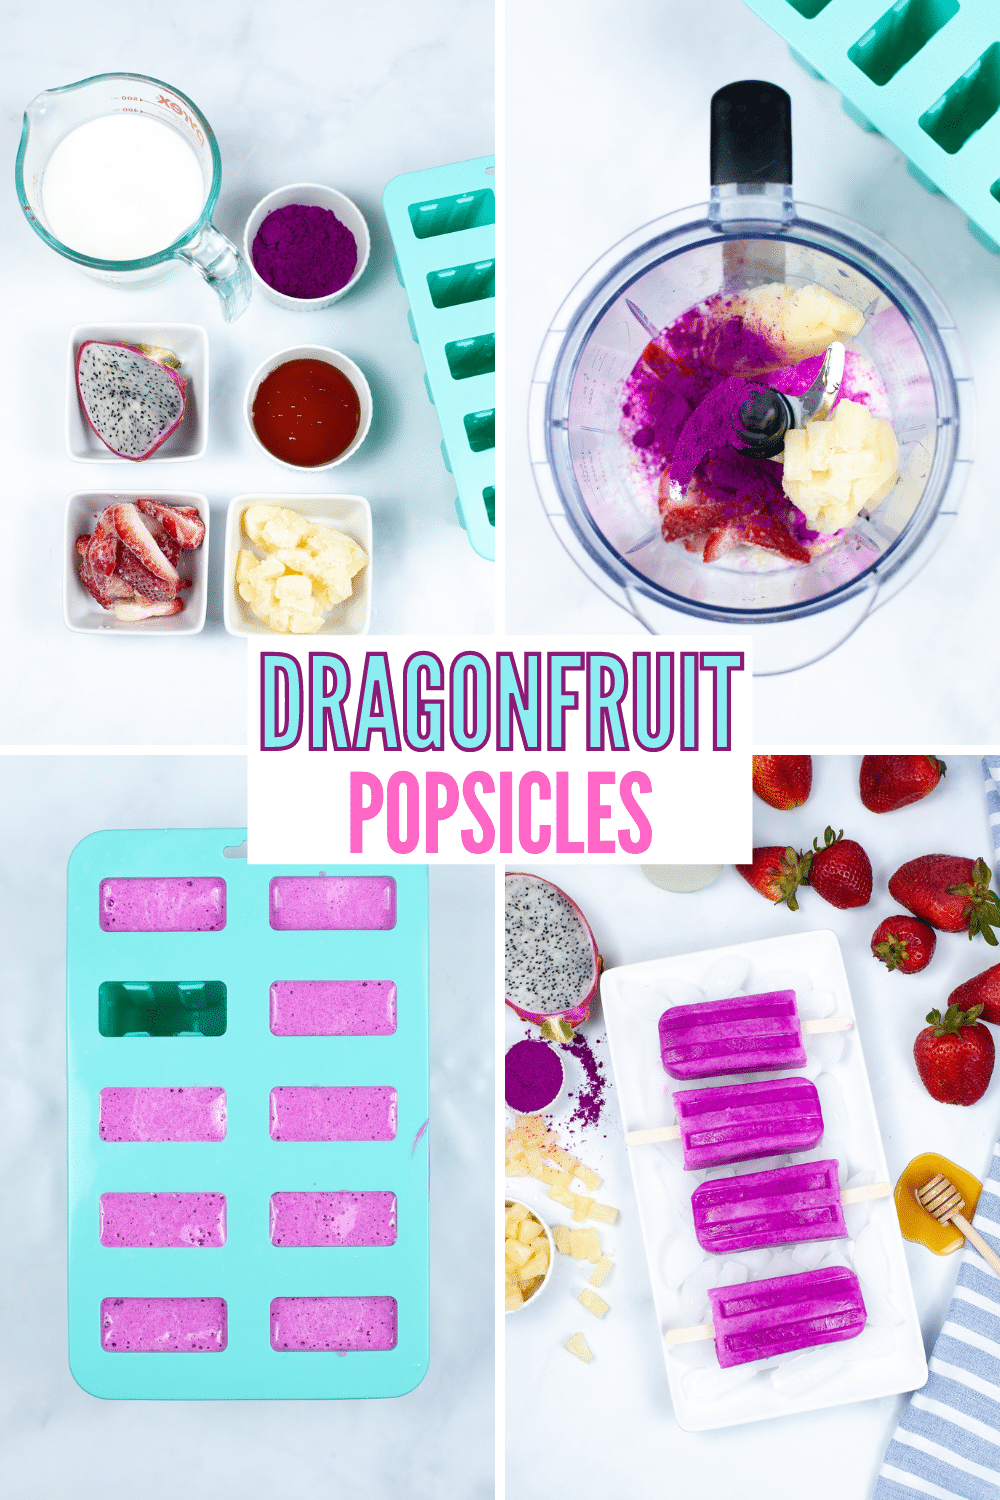 If you want a guilt-free treat that is perfect for summer, this dragon fruit popsicle is perfect! It's a sweet treat for all! #dragonfruit #popsicle #recipe #dessert via @wondermomwannab